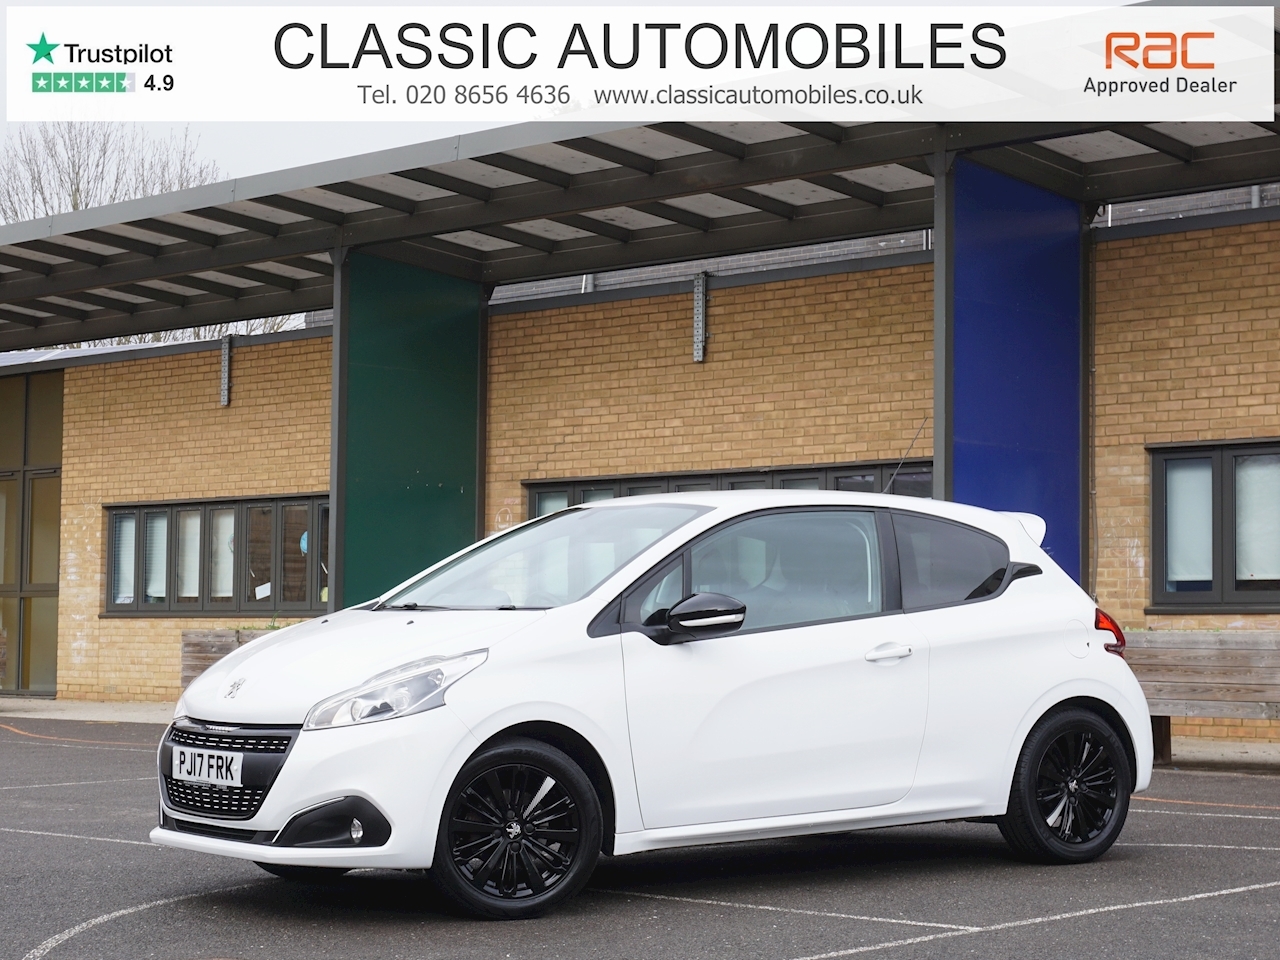 Used 2017 Peugeot 208 PureTech Black Edition For Sale in Surrey